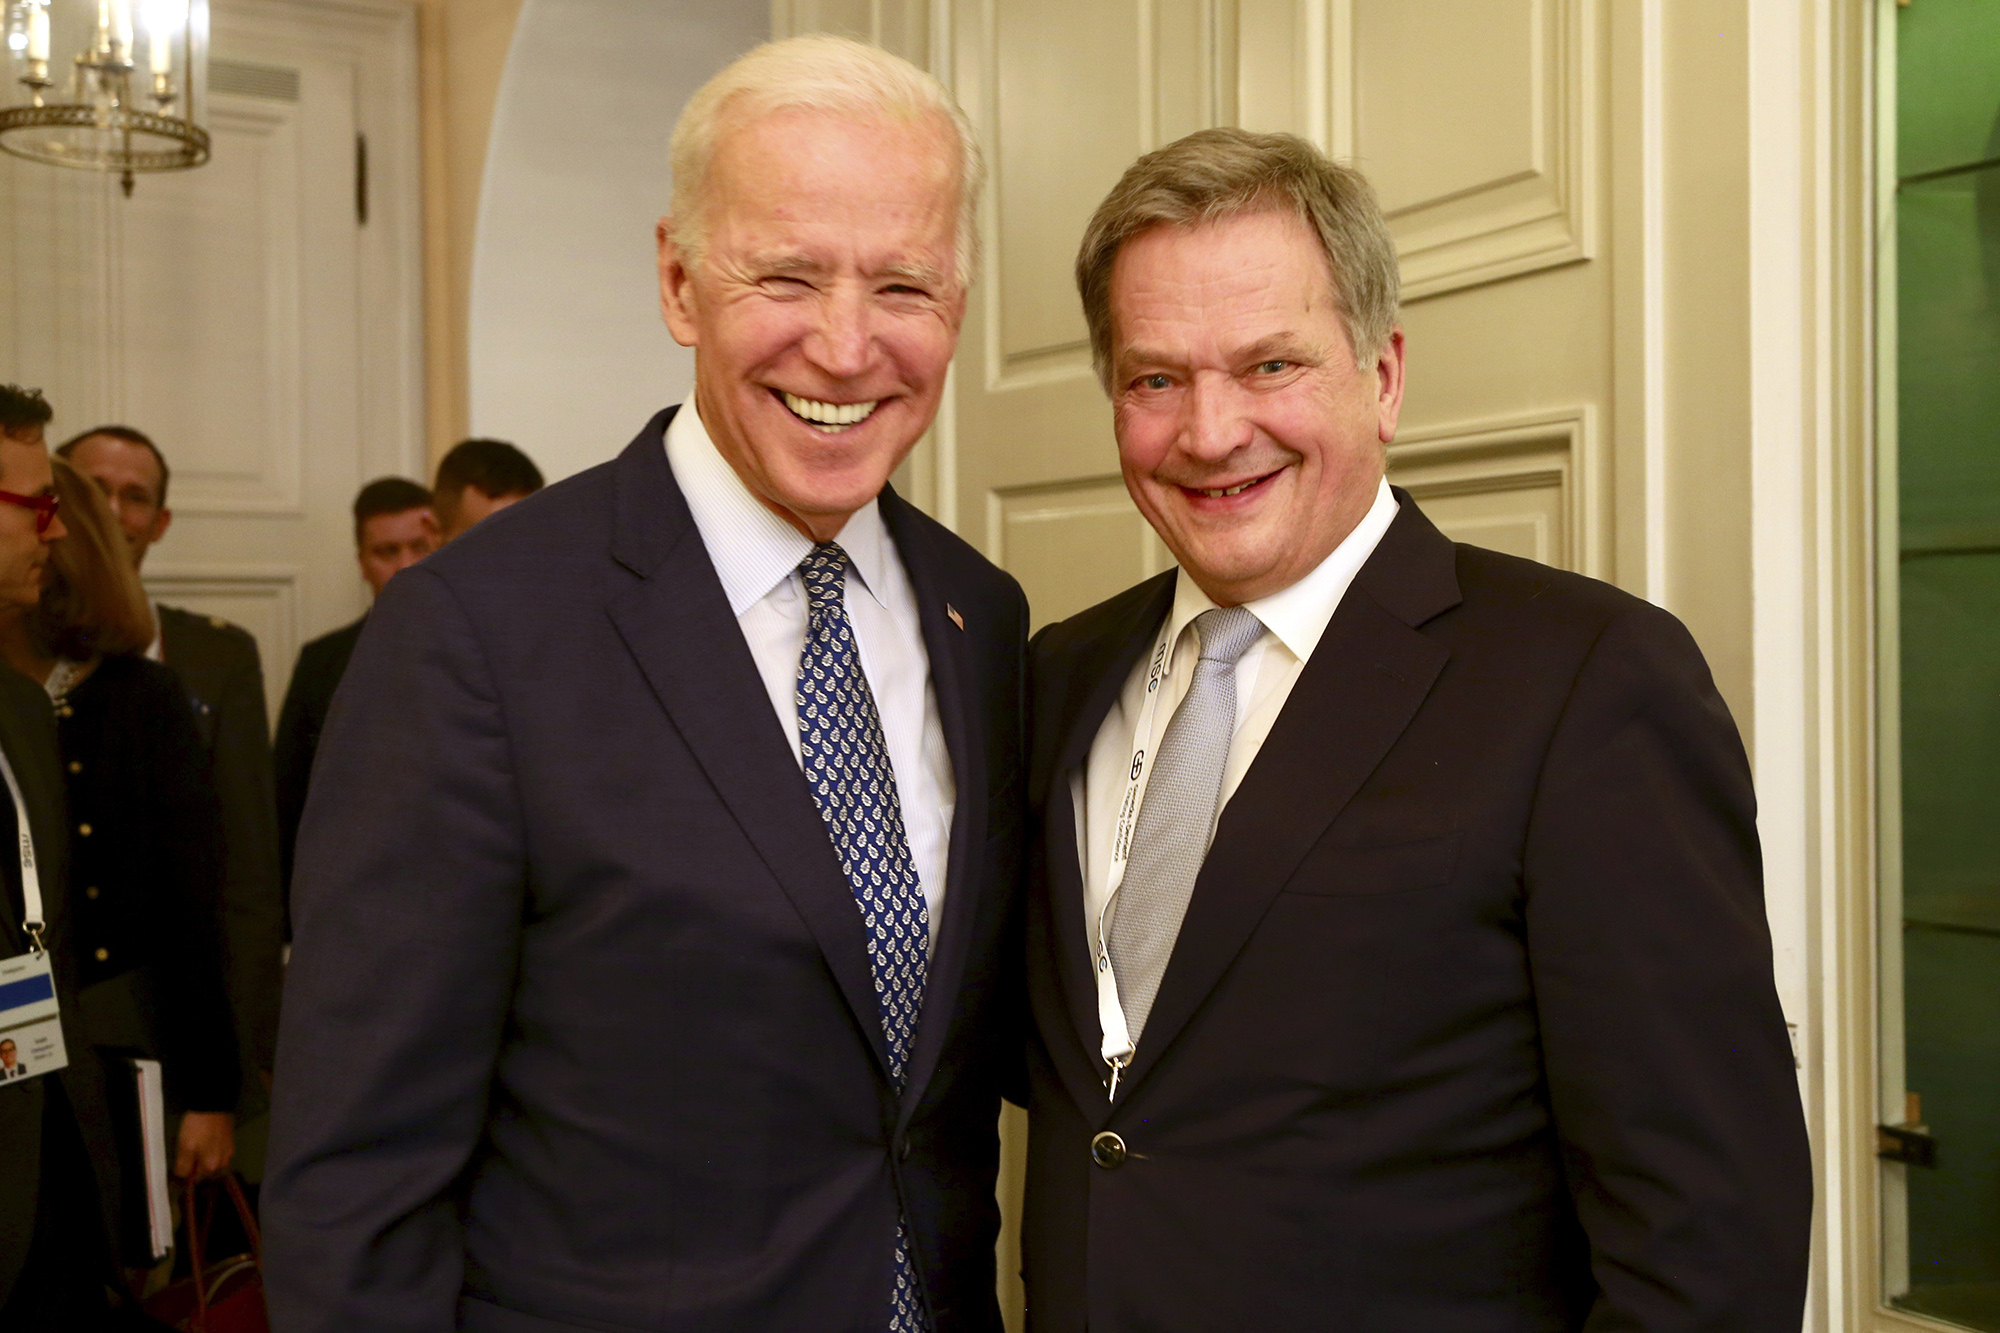 Niinistö will participate in the Munich Security Conference in the shadow of the crisis in Ukraine